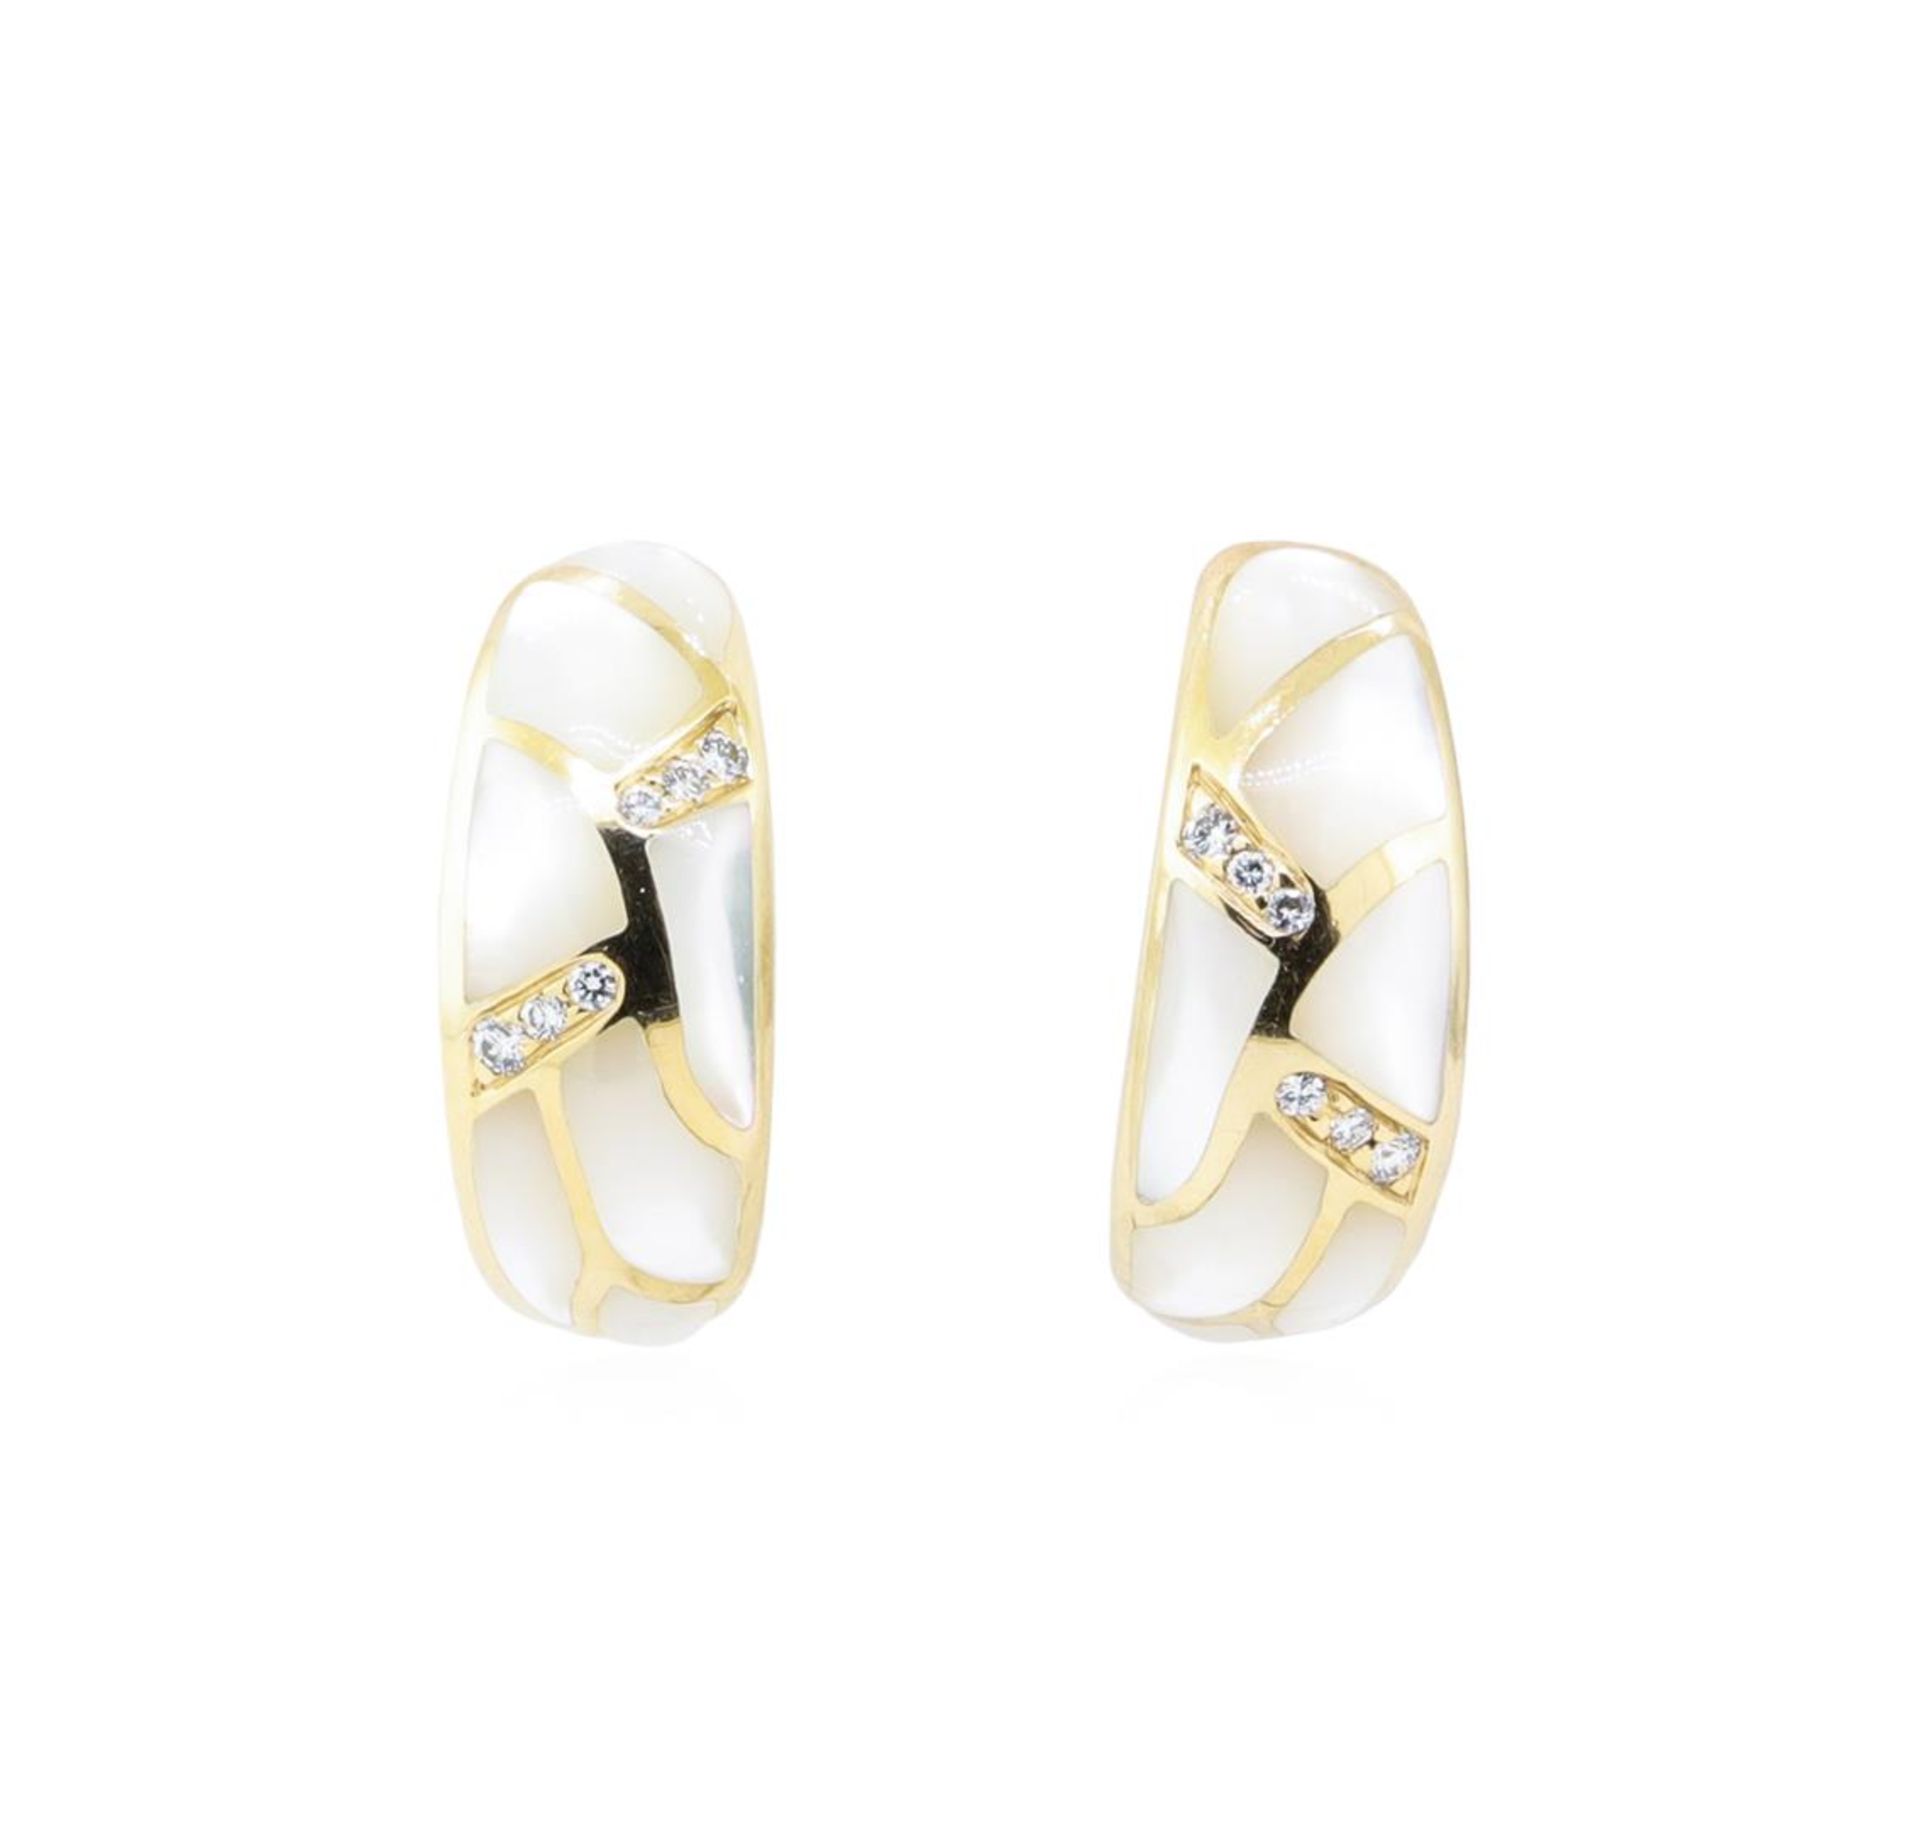 Kabana 0.25ctw Diamond and Inlaid Mother of Pearl Earrings - 14KT Yellow Gold